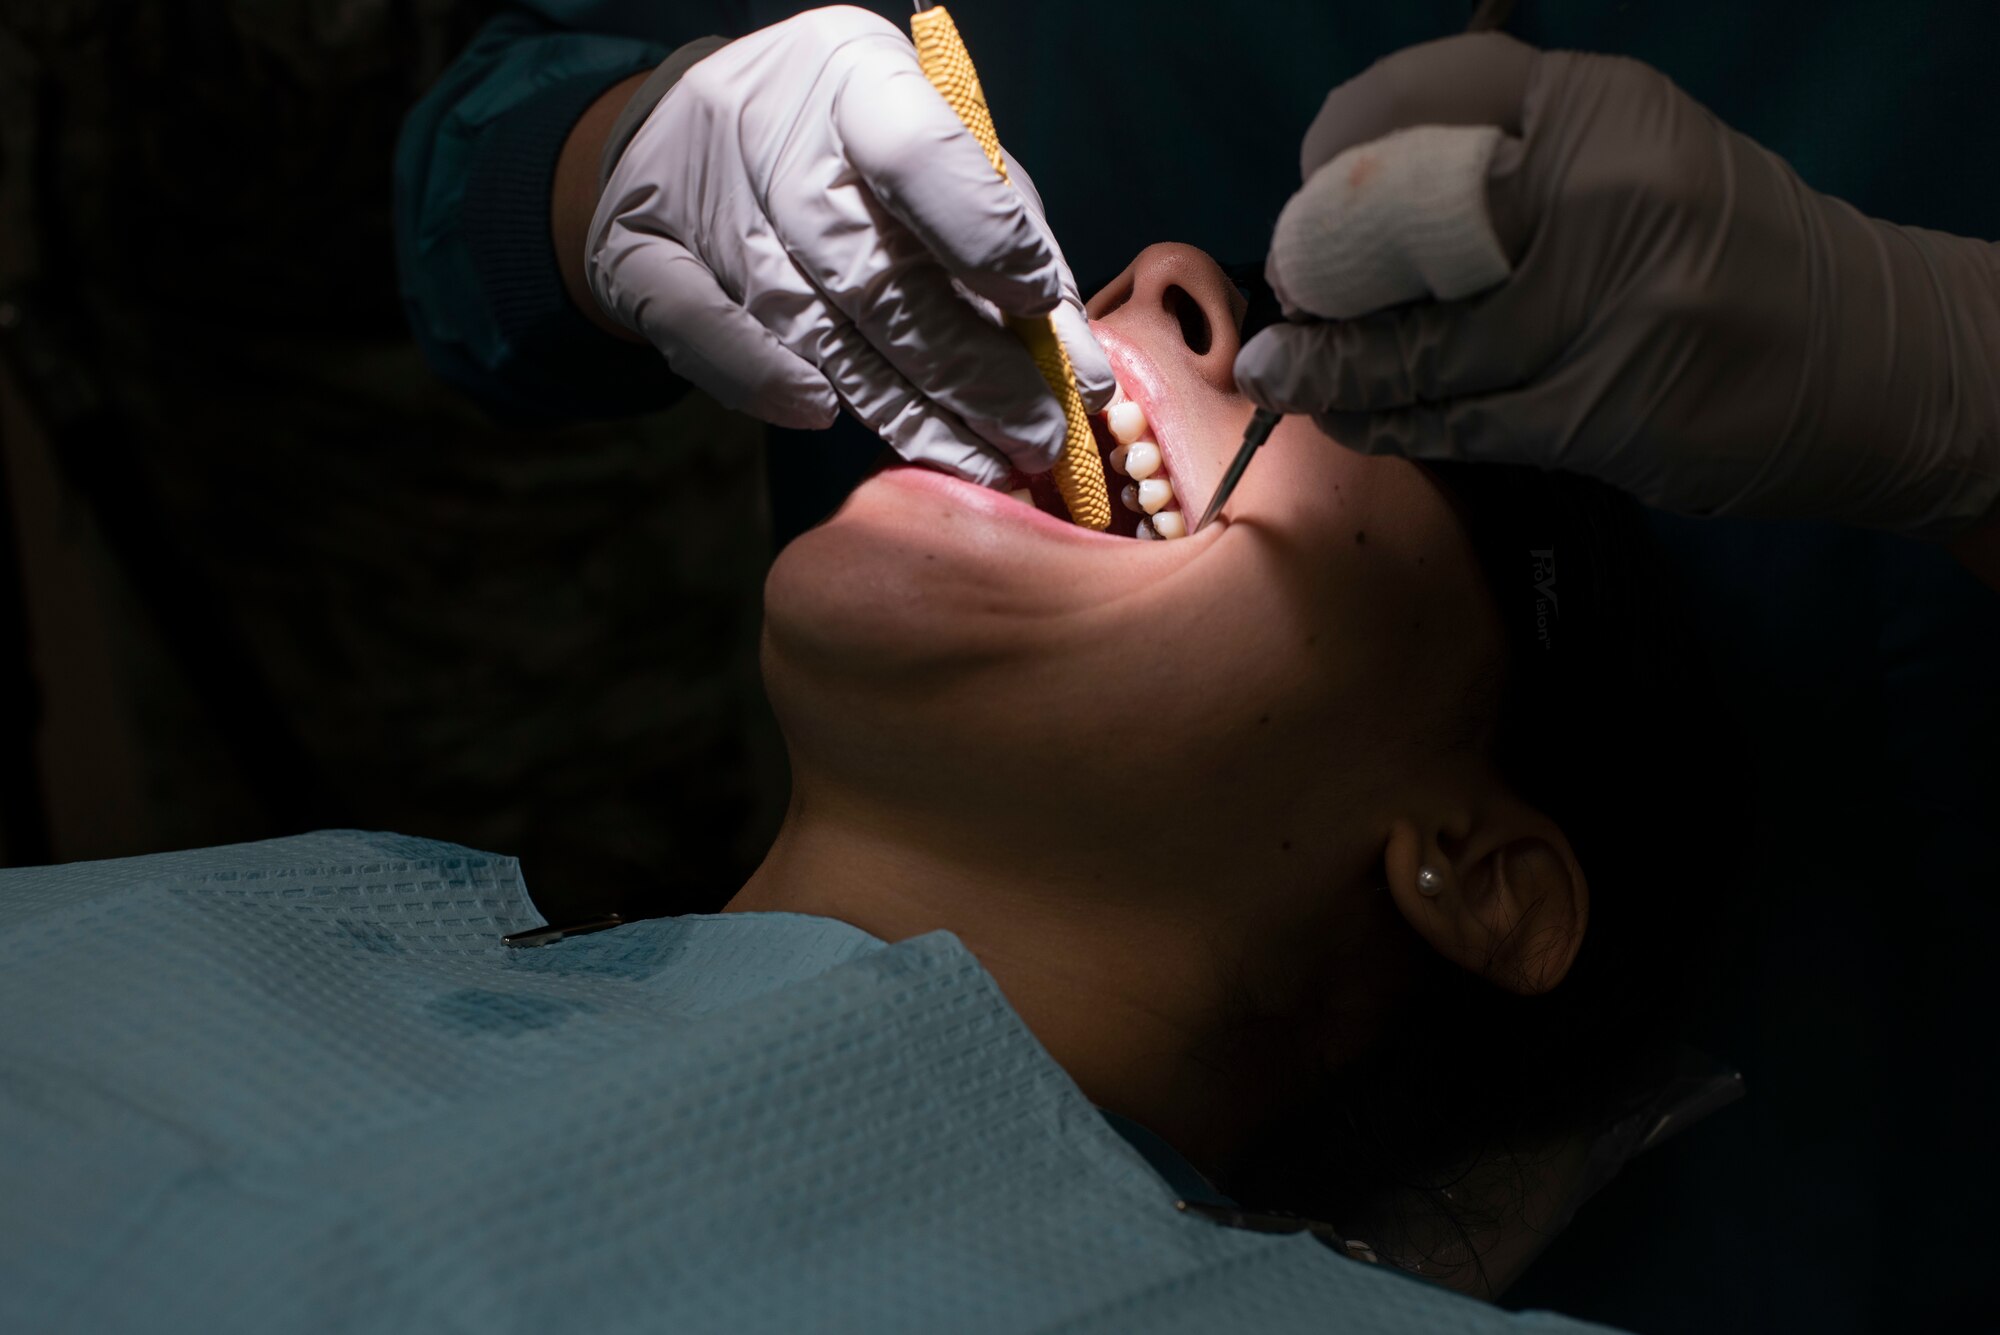 U.S. Air Force Senior Airman Courtney Lott performs a routine dental cleaning on Airman 1st Class Ana Karen Lemieux, both 35th Dental Squadron dental technicians, at Misawa Air Base, Japan, Aug. 17, 2018. The Ohio native decided to follow in the footsteps of her mother and join the U.S. Air Force post high school graduation, pursuing a career in the medical field. (U.S. Air Force photo by Airman 1st Class Collette Brooks)